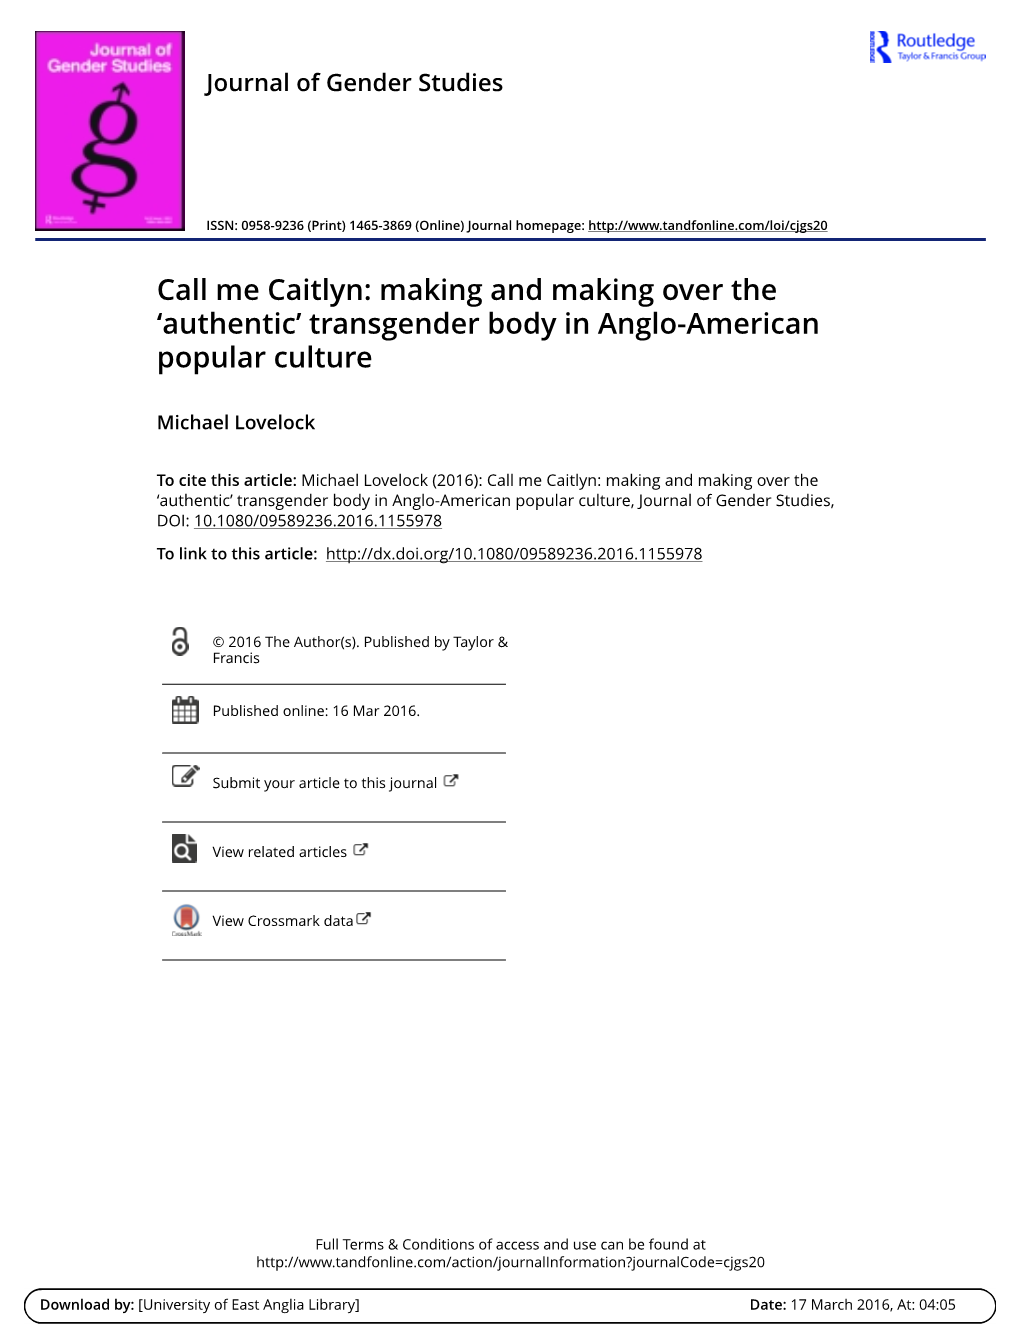 Call Me Caitlyn: Making and Making Over the ‘Authentic’ Transgender Body in Anglo-American Popular Culture